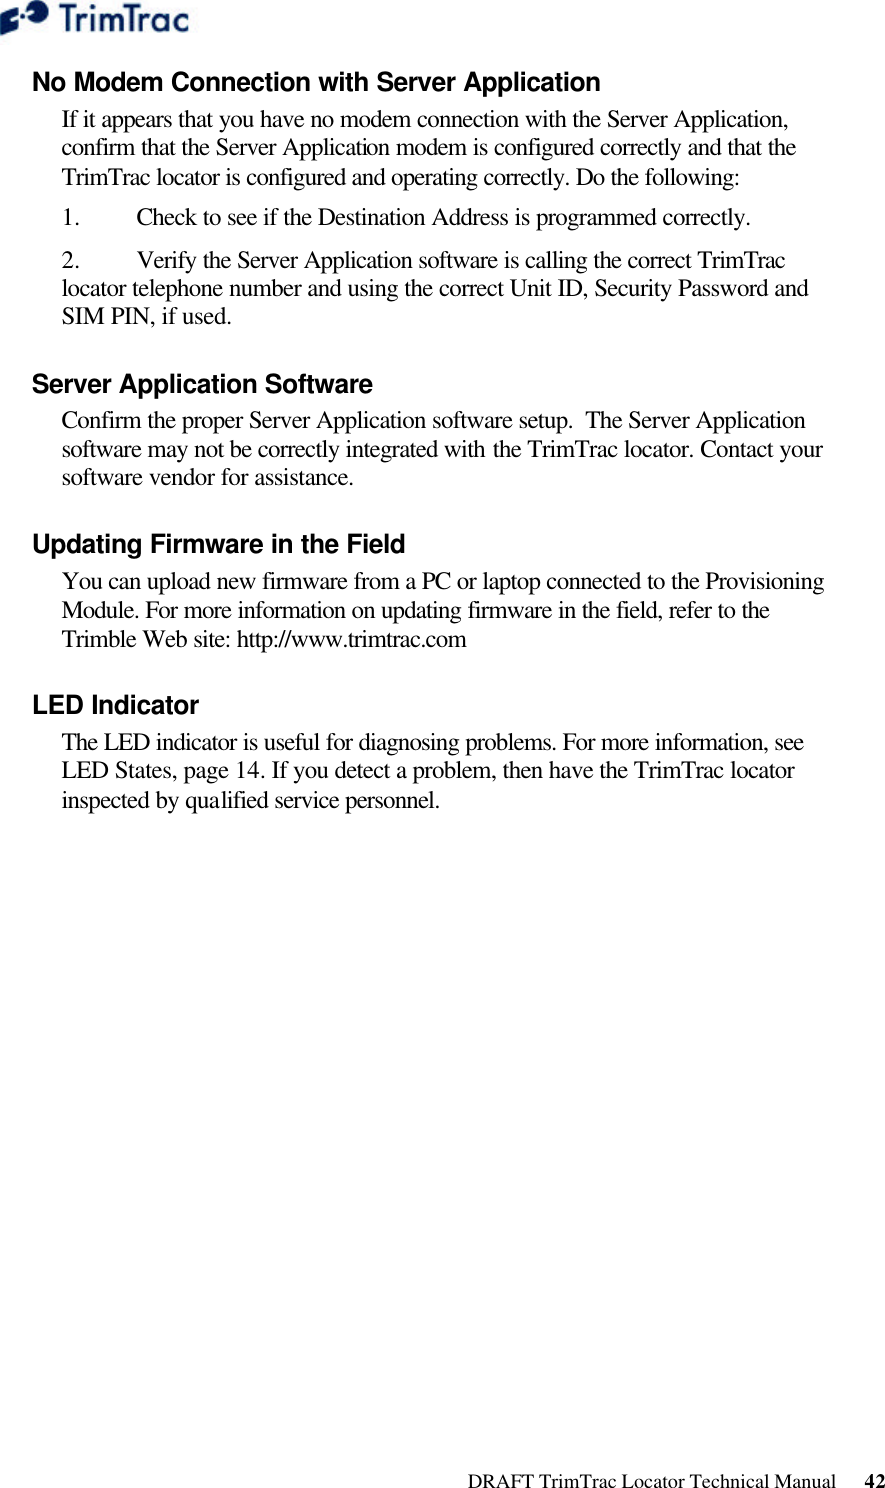  DRAFT TrimTrac Locator Technical Manual      42 No Modem Connection with Server Application  If it appears that you have no modem connection with the Server Application, confirm that the Server Application modem is configured correctly and that the TrimTrac locator is configured and operating correctly. Do the following:  1.  Check to see if the Destination Address is programmed correctly. 2.  Verify the Server Application software is calling the correct TrimTrac locator telephone number and using the correct Unit ID, Security Password and SIM PIN, if used. Server Application Software  Confirm the proper Server Application software setup.  The Server Application software may not be correctly integrated with the TrimTrac locator. Contact your software vendor for assistance. Updating Firmware in the Field  You can upload new firmware from a PC or laptop connected to the Provisioning Module. For more information on updating firmware in the field, refer to the Trimble Web site: http://www.trimtrac.com LED Indicator  The LED indicator is useful for diagnosing problems. For more information, see LED States, page 14. If you detect a problem, then have the TrimTrac locator inspected by qualified service personnel.   